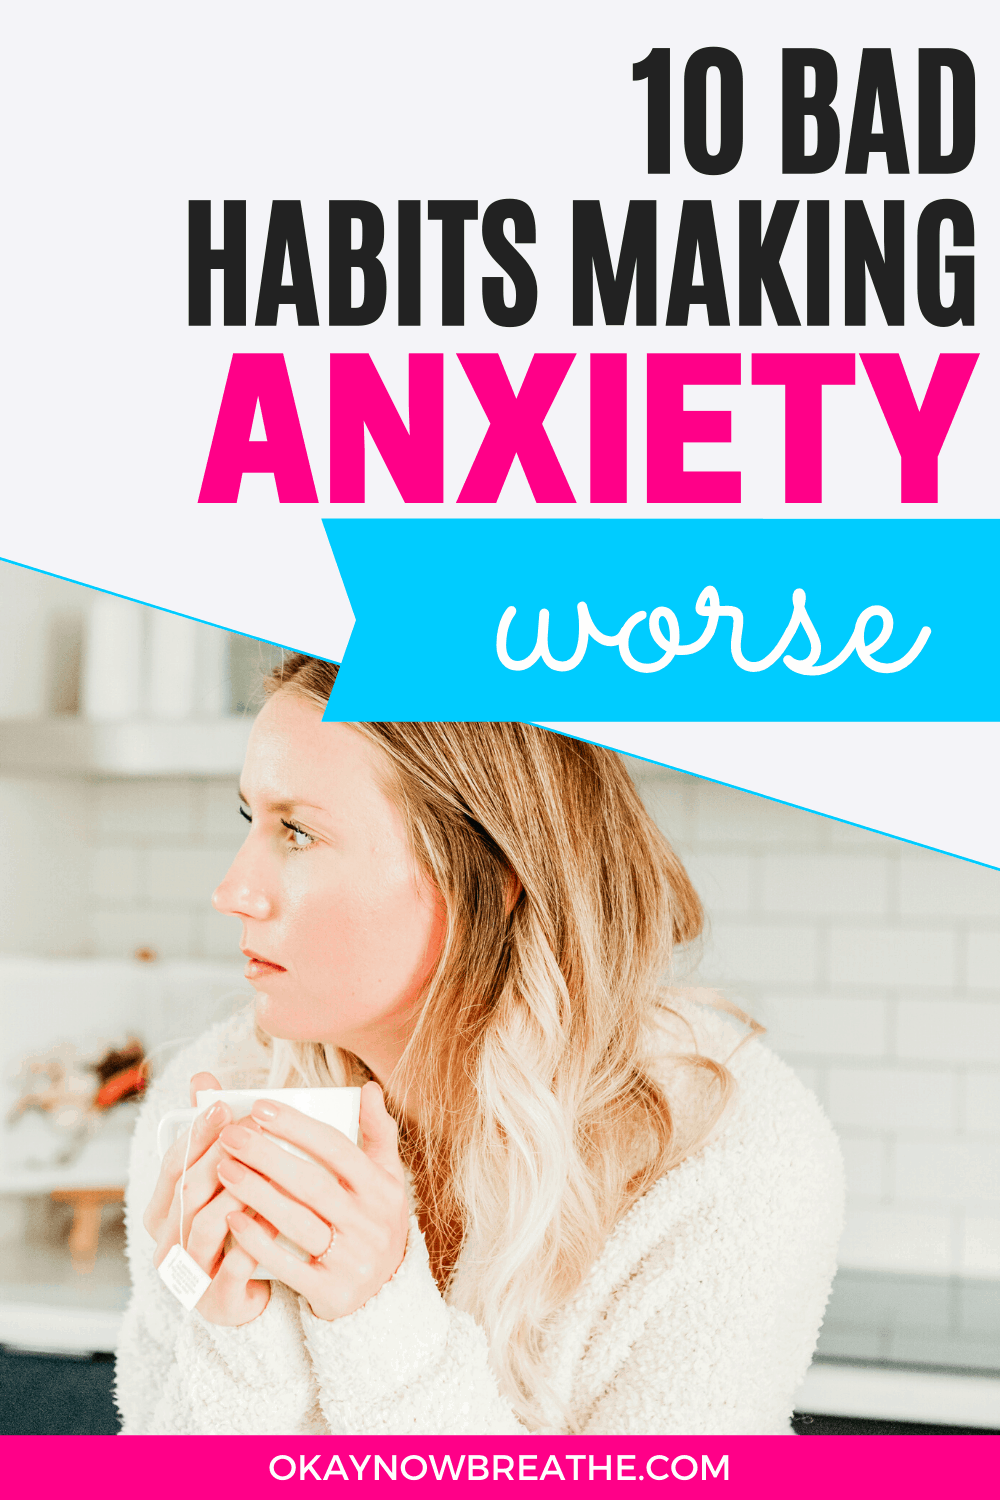 Blonde female in white sweater holding a cup of tea. Text overlay says 10 Bad Habits Making Anxiety Worse